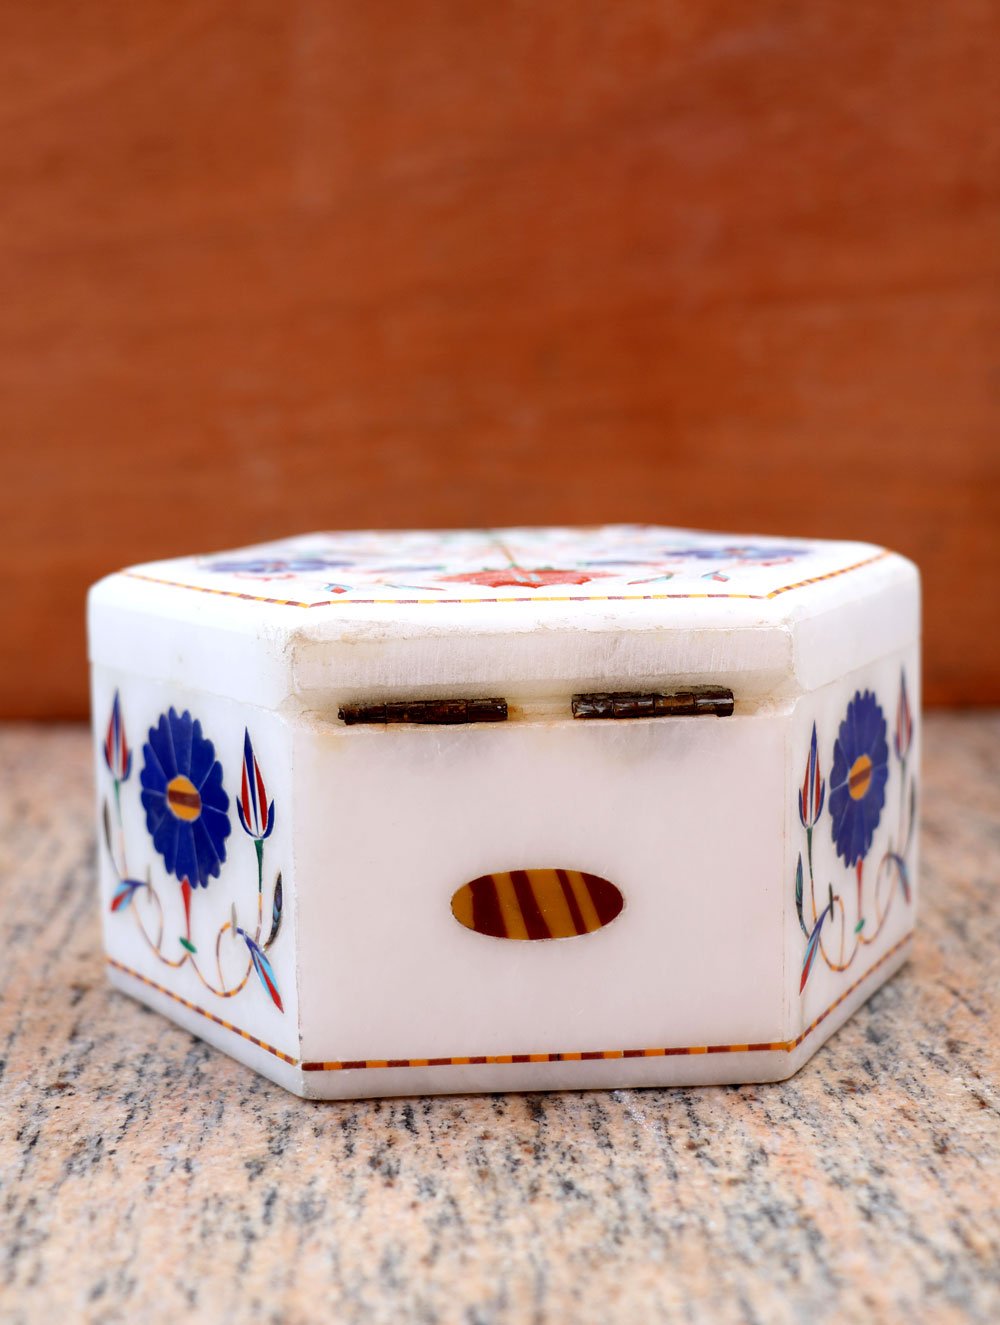 Load image into Gallery viewer, Marble Inlay Round Box